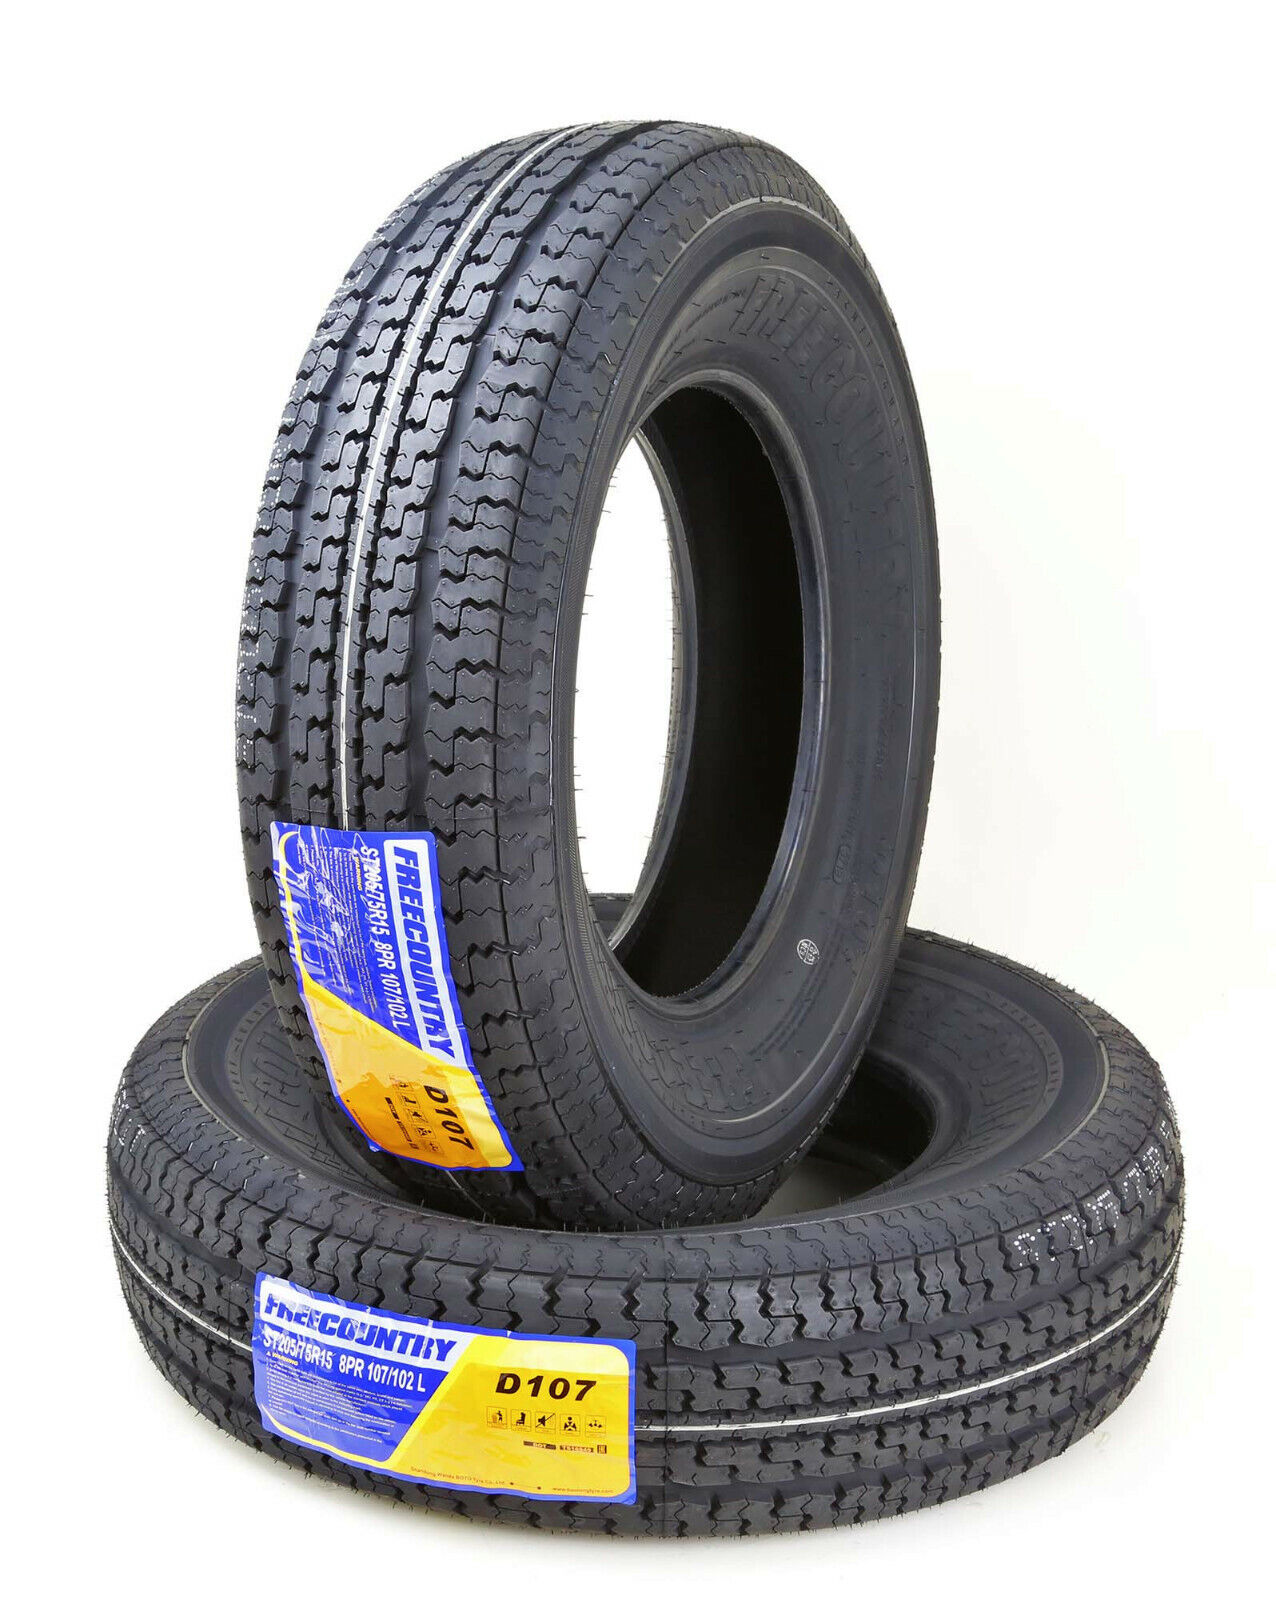 2 Trailer Tires ST205/75R15 FREE COUNTRY 8 Ply Load Range D 107M w/Scuff Guard